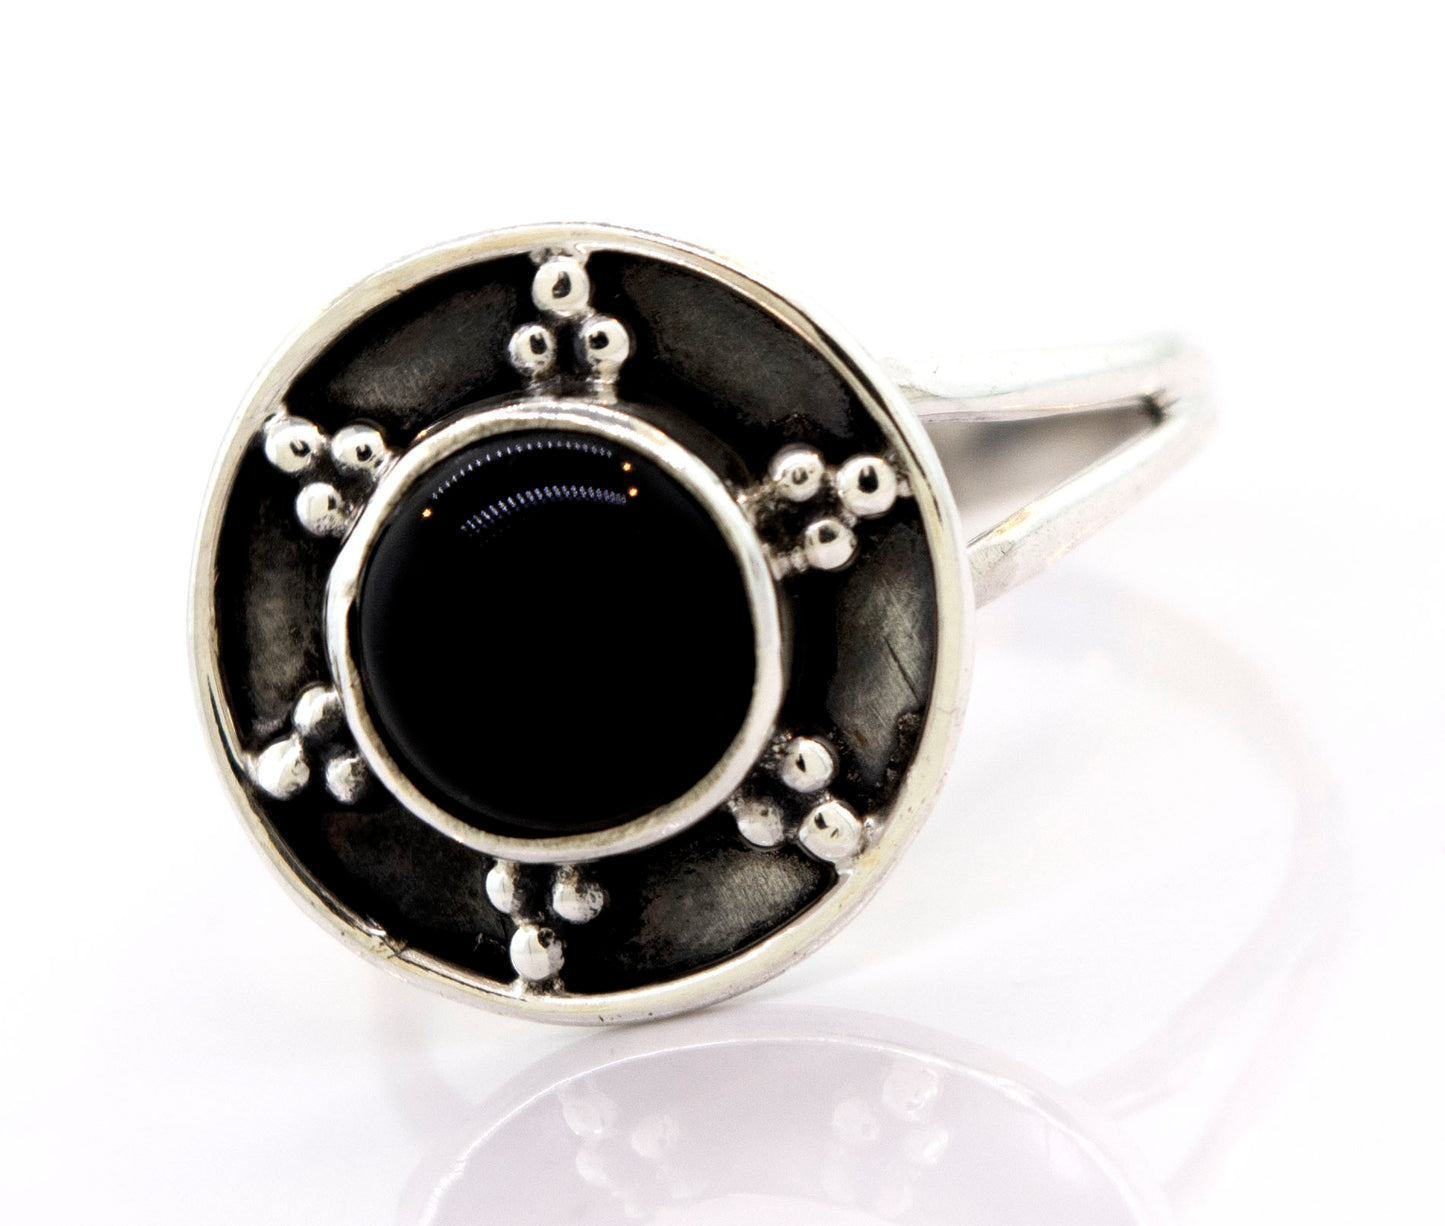 
                  
                    Gemstone Ring With Unique Oxidized Design with a round black stone centerpiece, surrounded by decorative silver bead details. The band, made of oxidized silver, is simple and polished, adding a timeless touch to this exquisite piece of gemstone jewelry.
                  
                